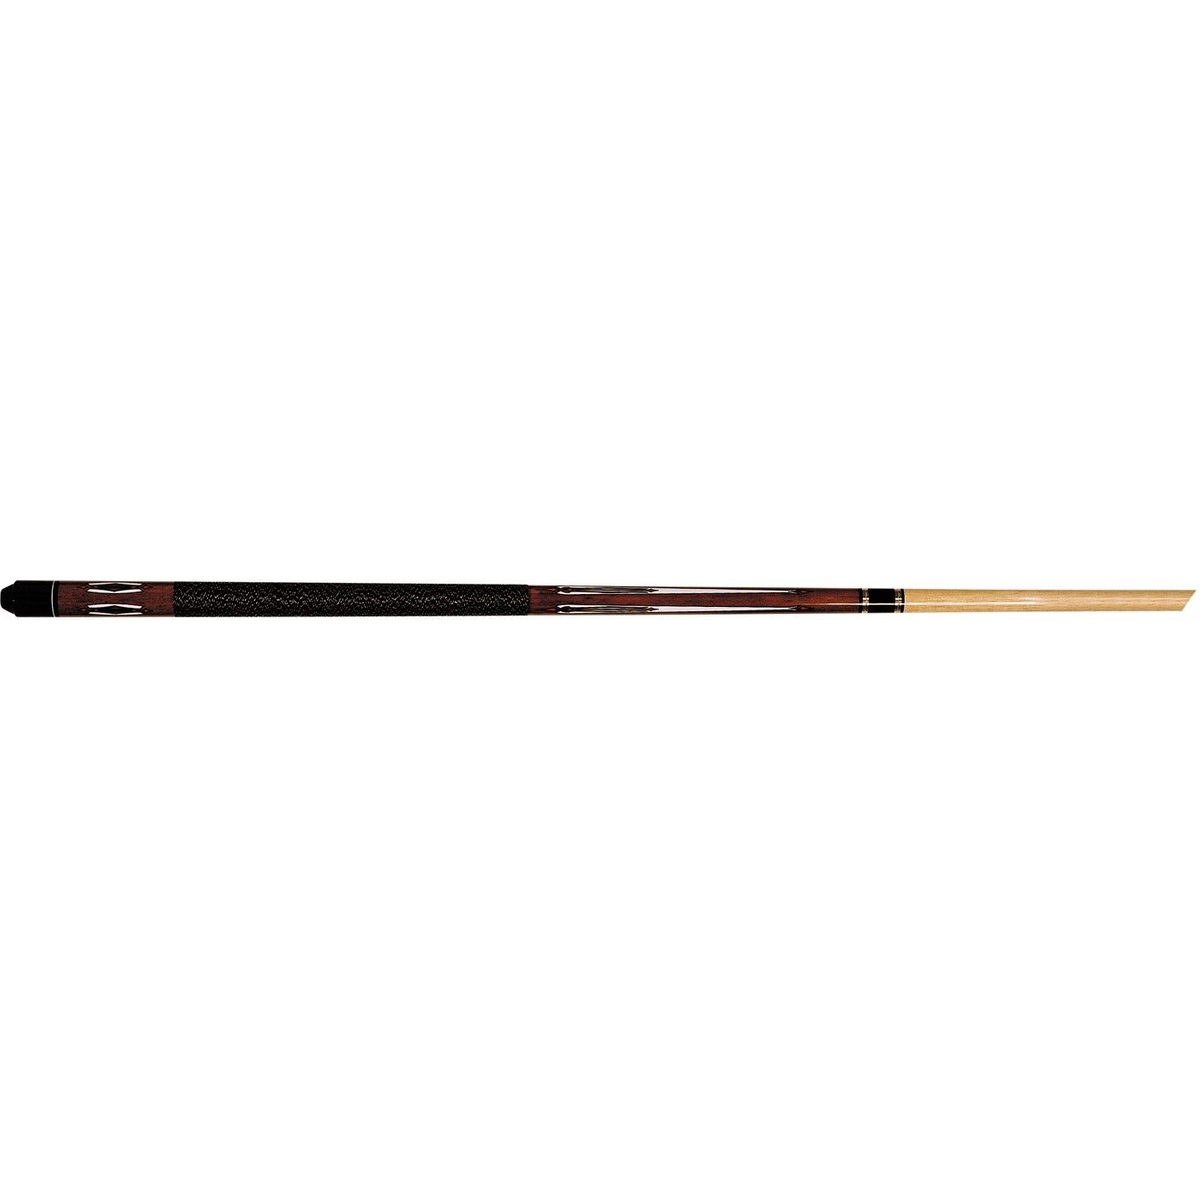 Poolkeu Hardhout 2-Delig 145 cm Tycoon Bruin